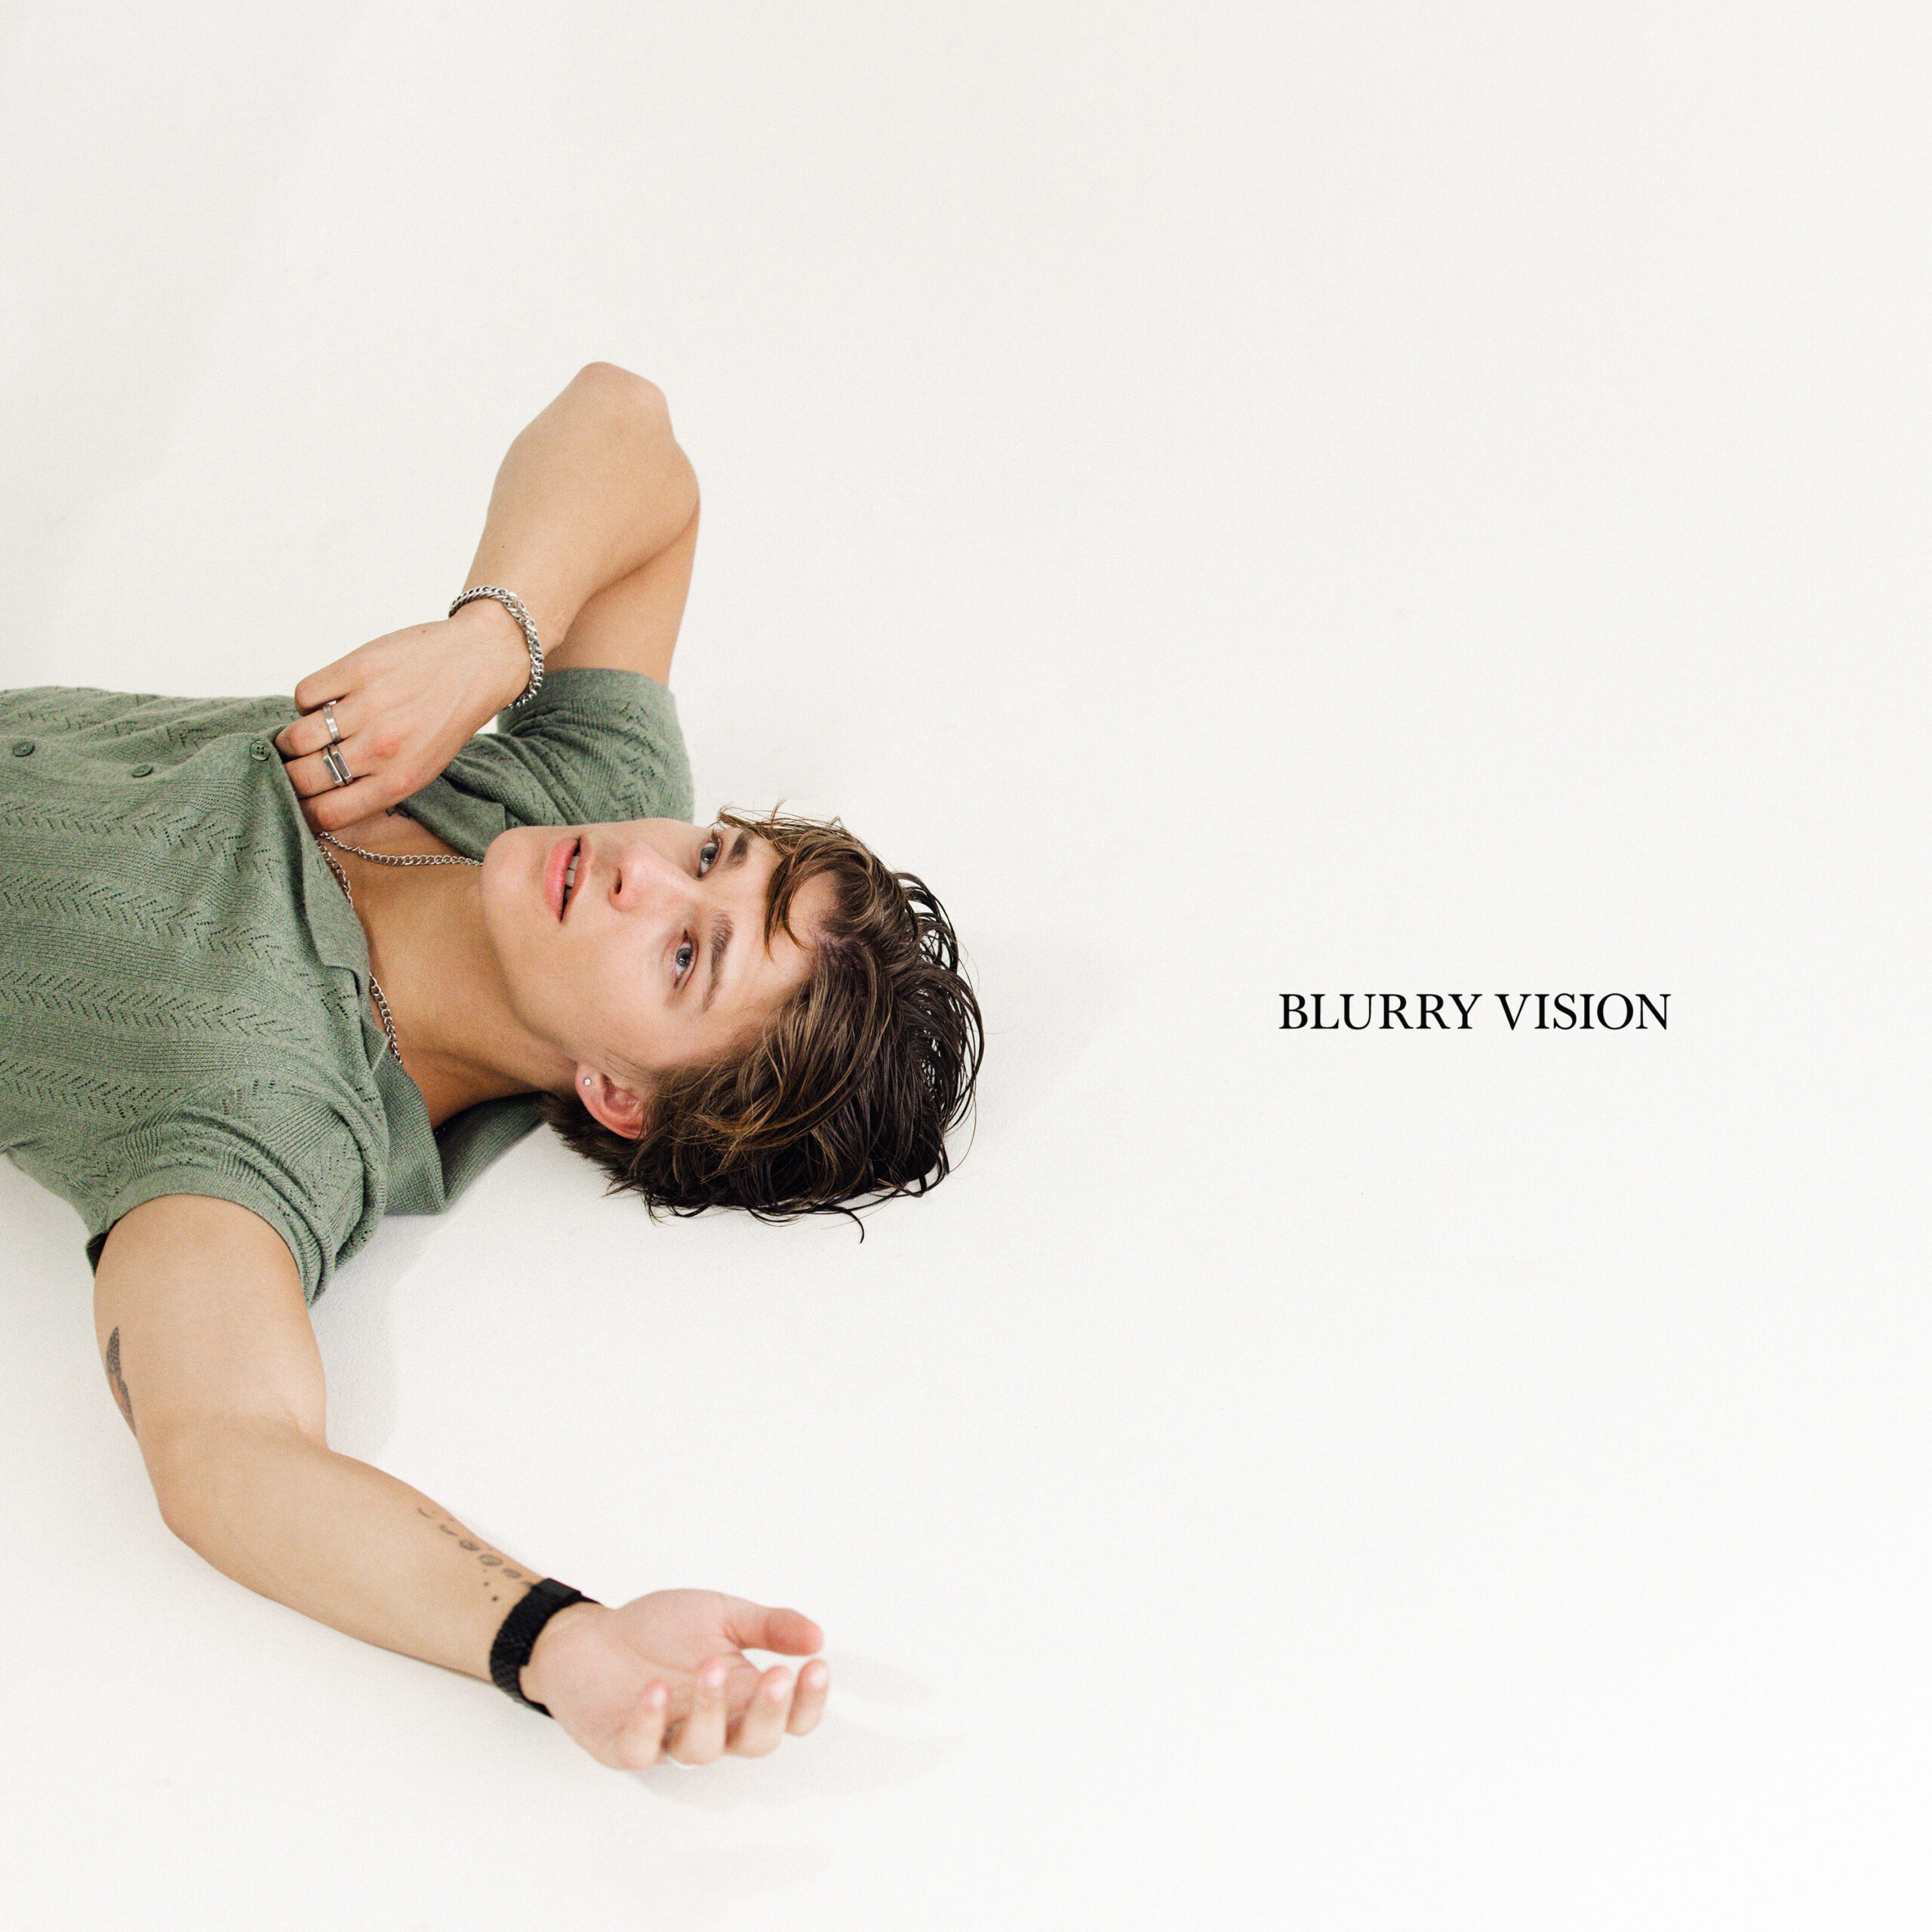 Alex Sampson lies on his back, gazing upward with a contemplative expression, wearing a sage green knit shirt. His wet hair is tousled, and he's accessorized with subtle jewelry. The phrase 'BLURRY VISION' is inscribed to the side, suggesting a deeper, introspective context.